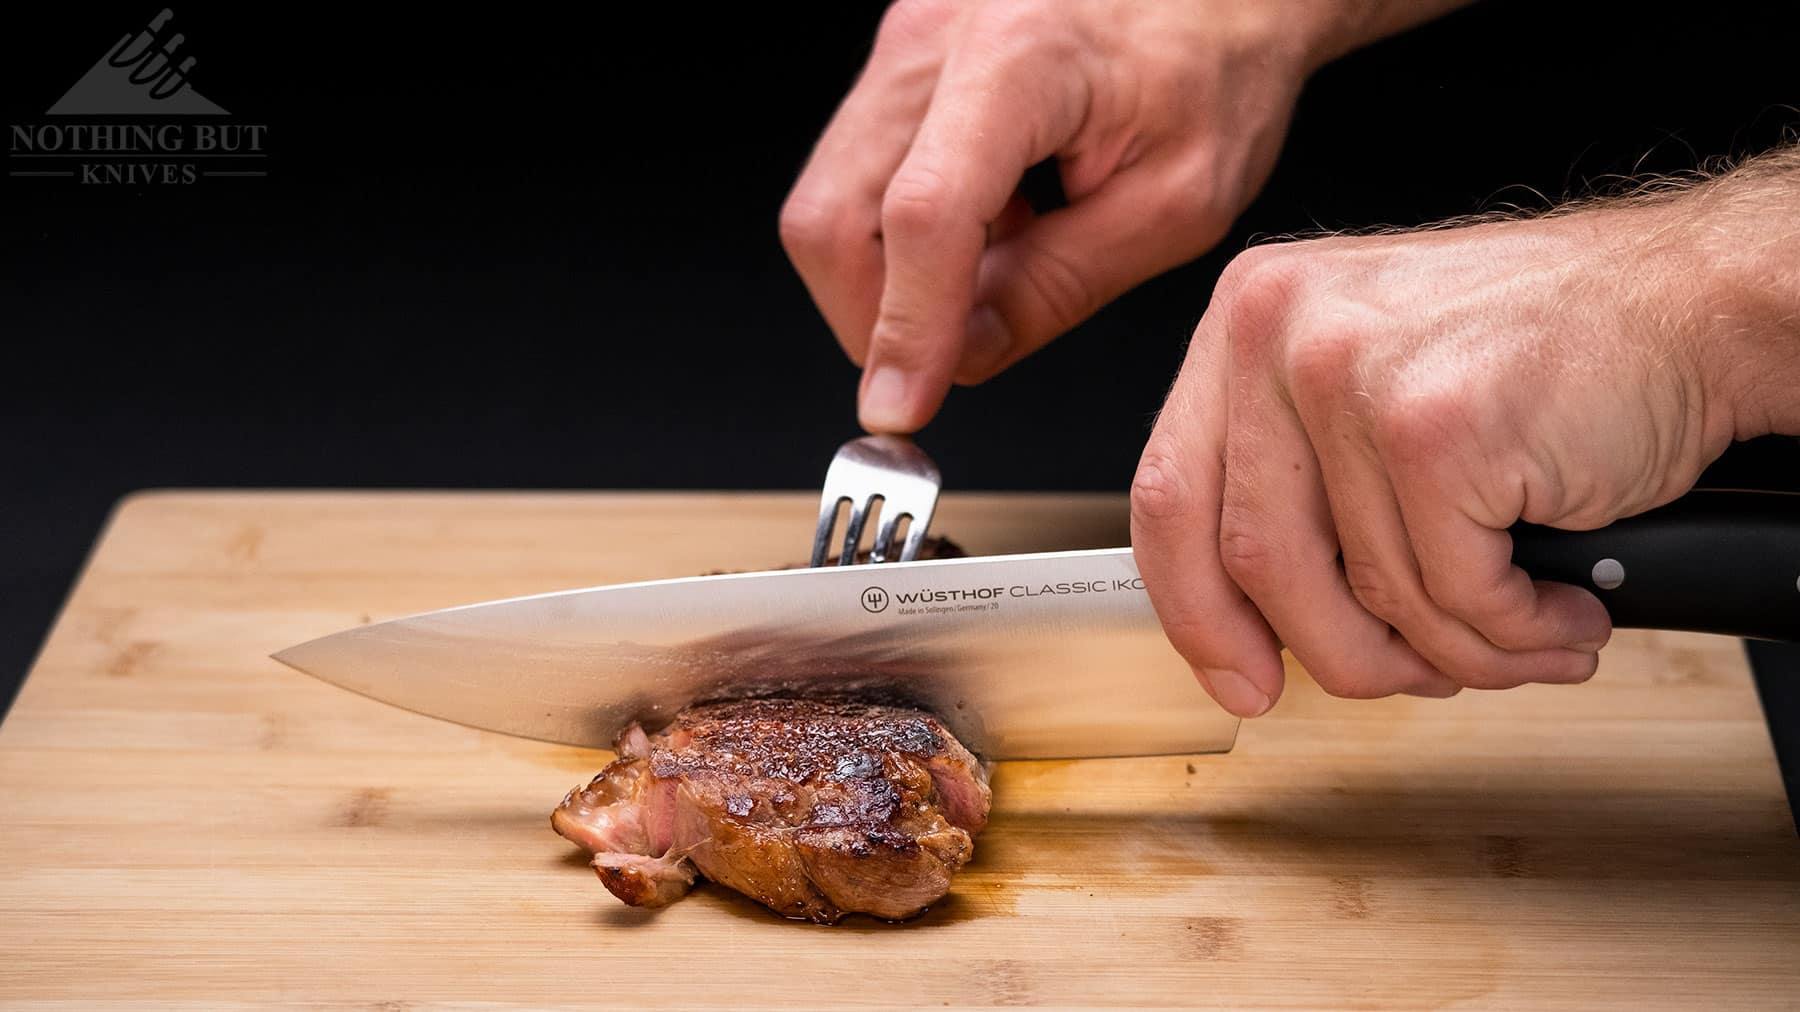 The 8 inch Wusthof Classic Ikon chef knife is a good knife, but it may not be the best choice for everyone. 